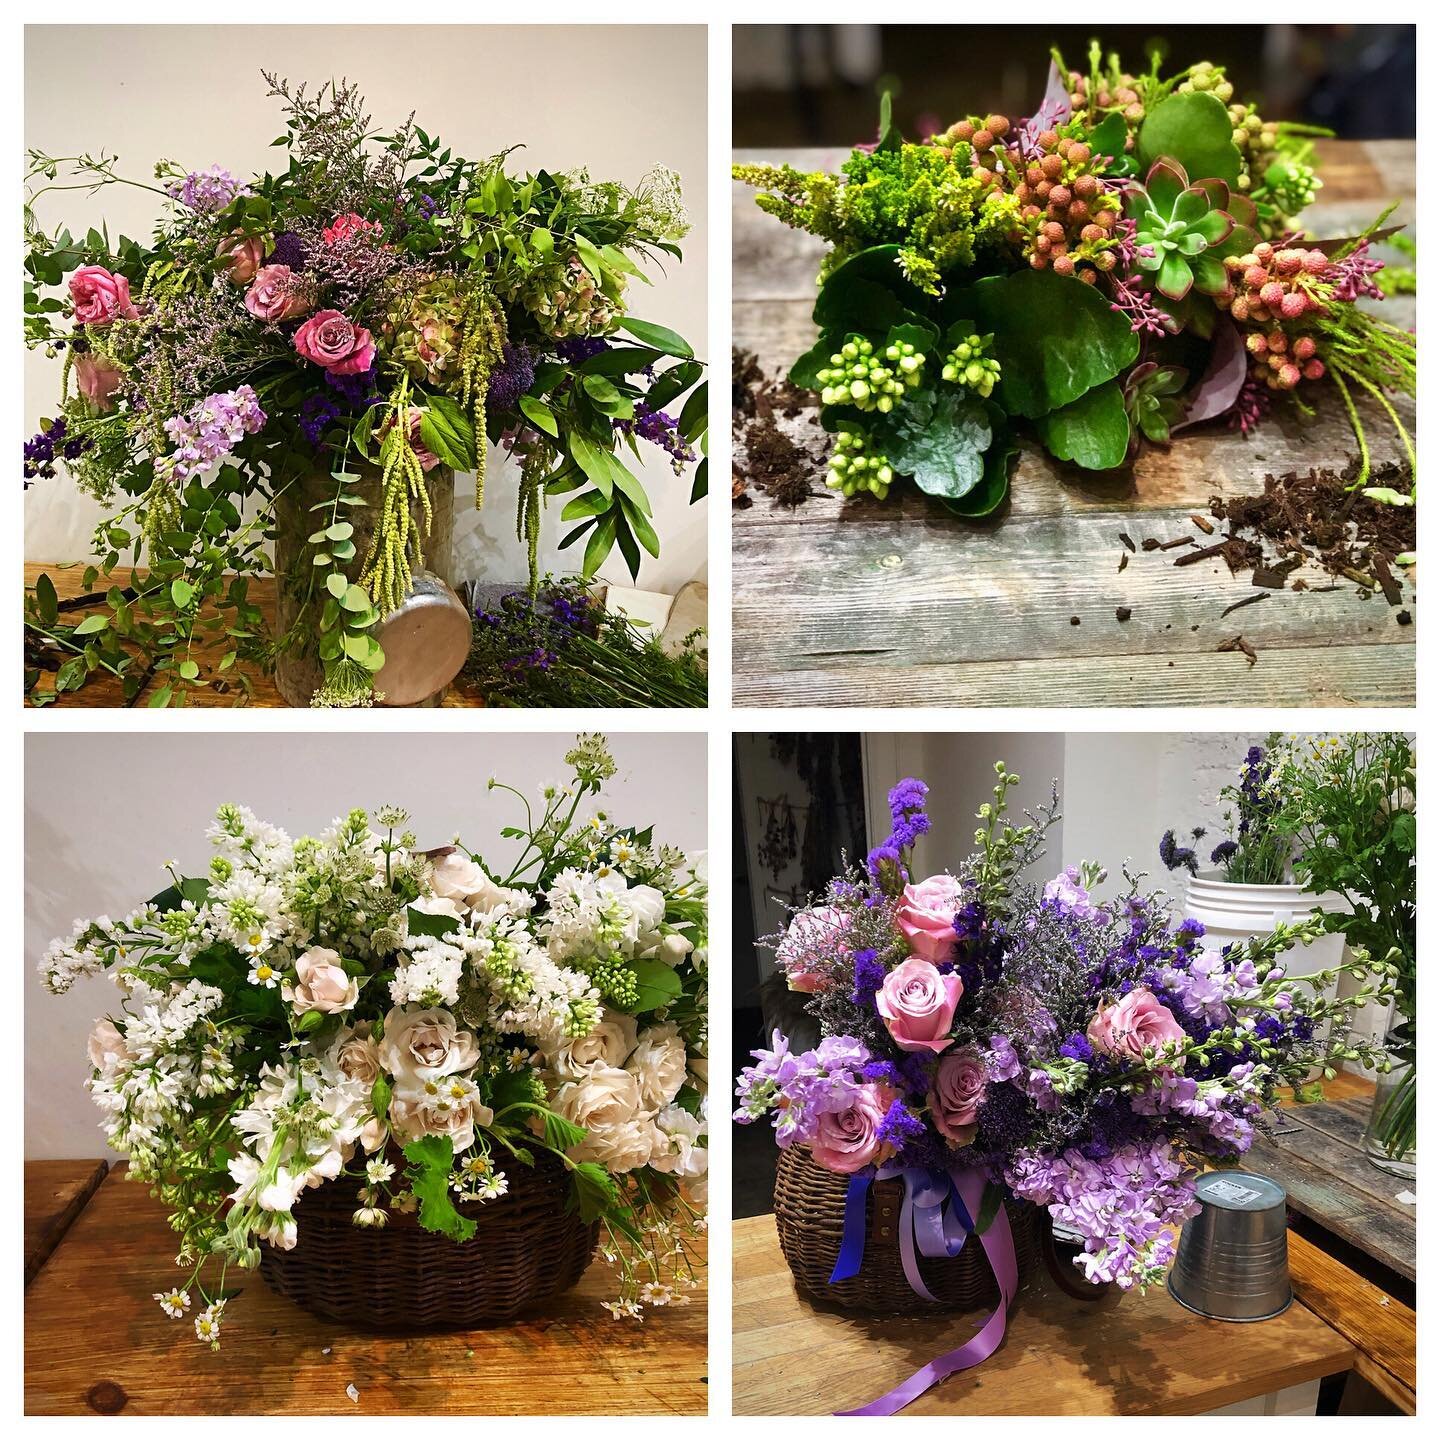 Catherine Mueller Paris floral school ! Today&rsquo;s Creations!!!
Lamb&rsquo;sEarFlorals!!!!